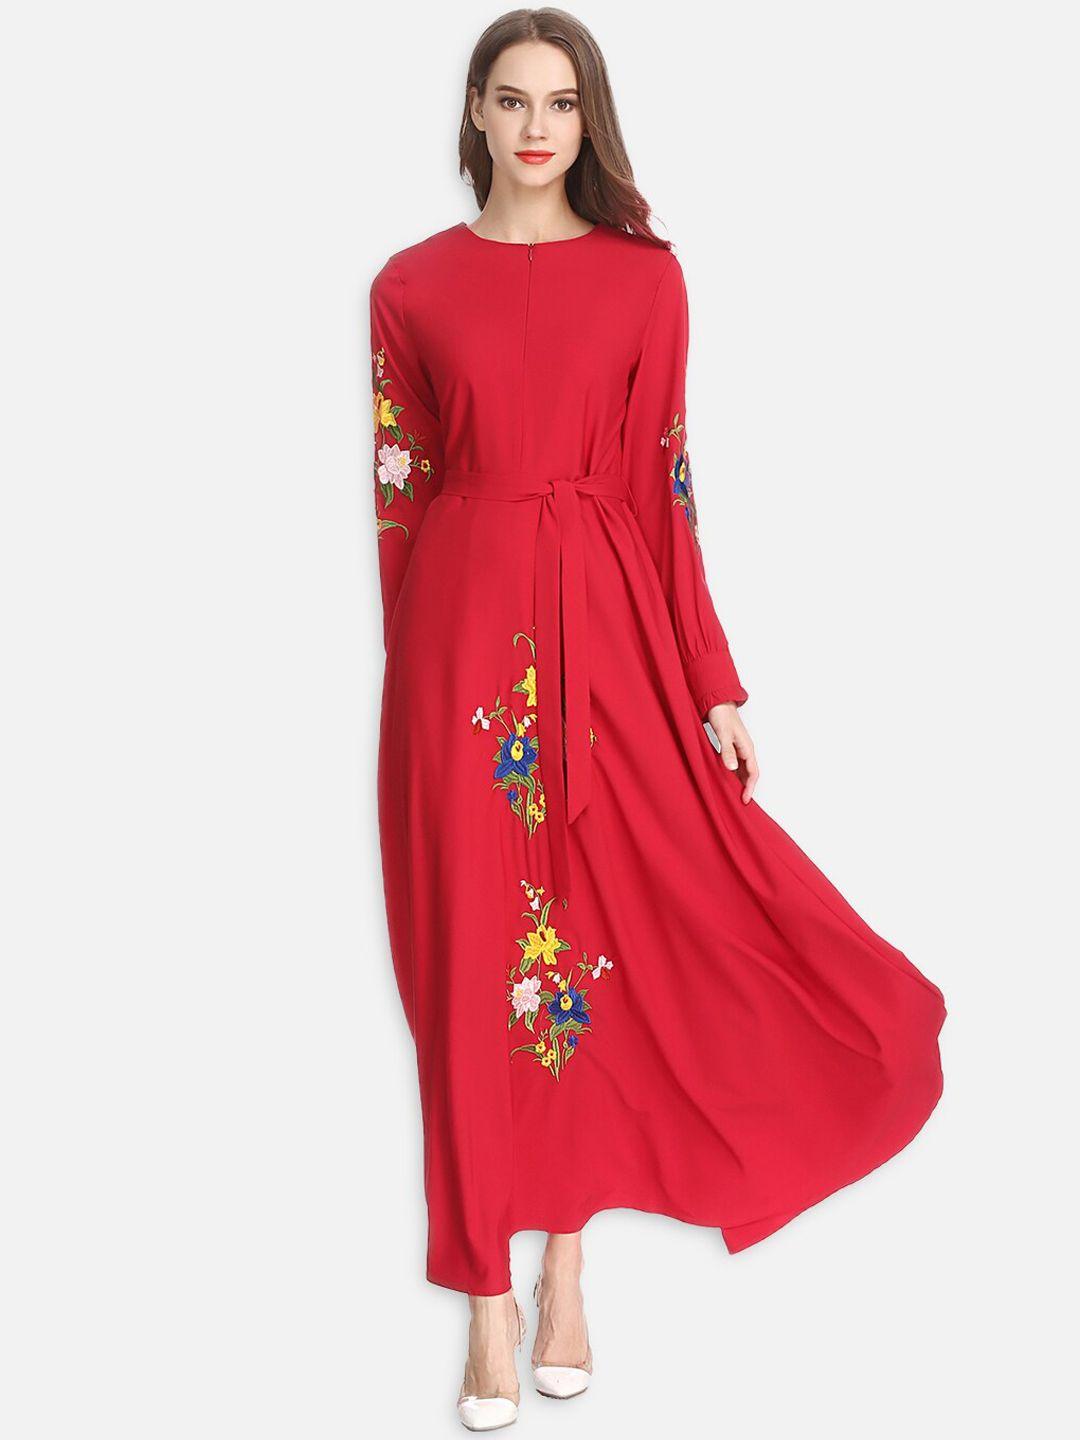 jc collection red maxi dress